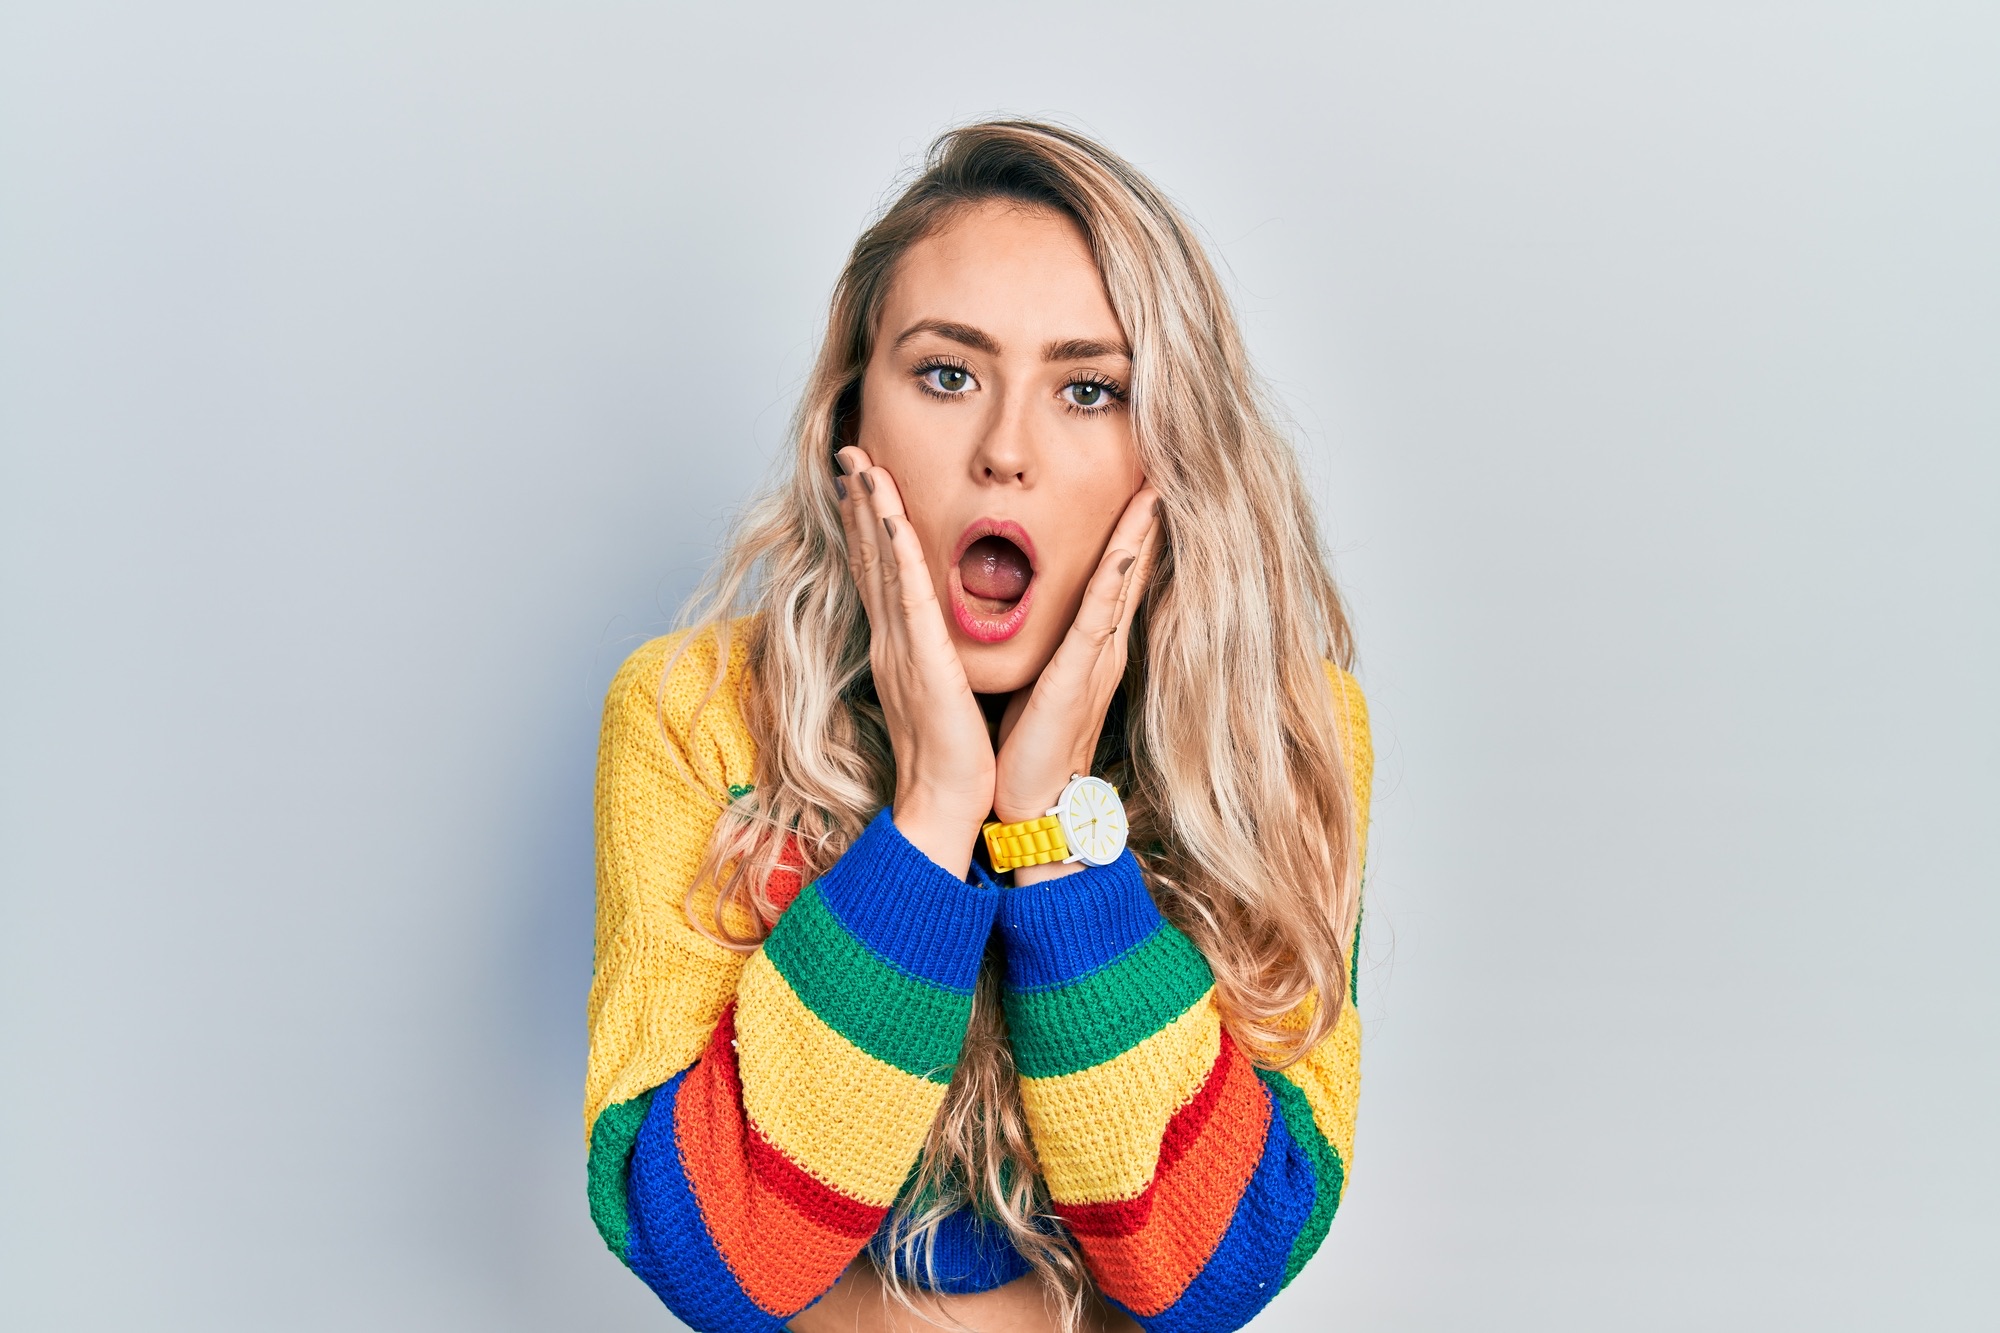 Beautiful young blonde woman wearing colored sweater afraid and shocked, surprise and amazed expression with hands on face